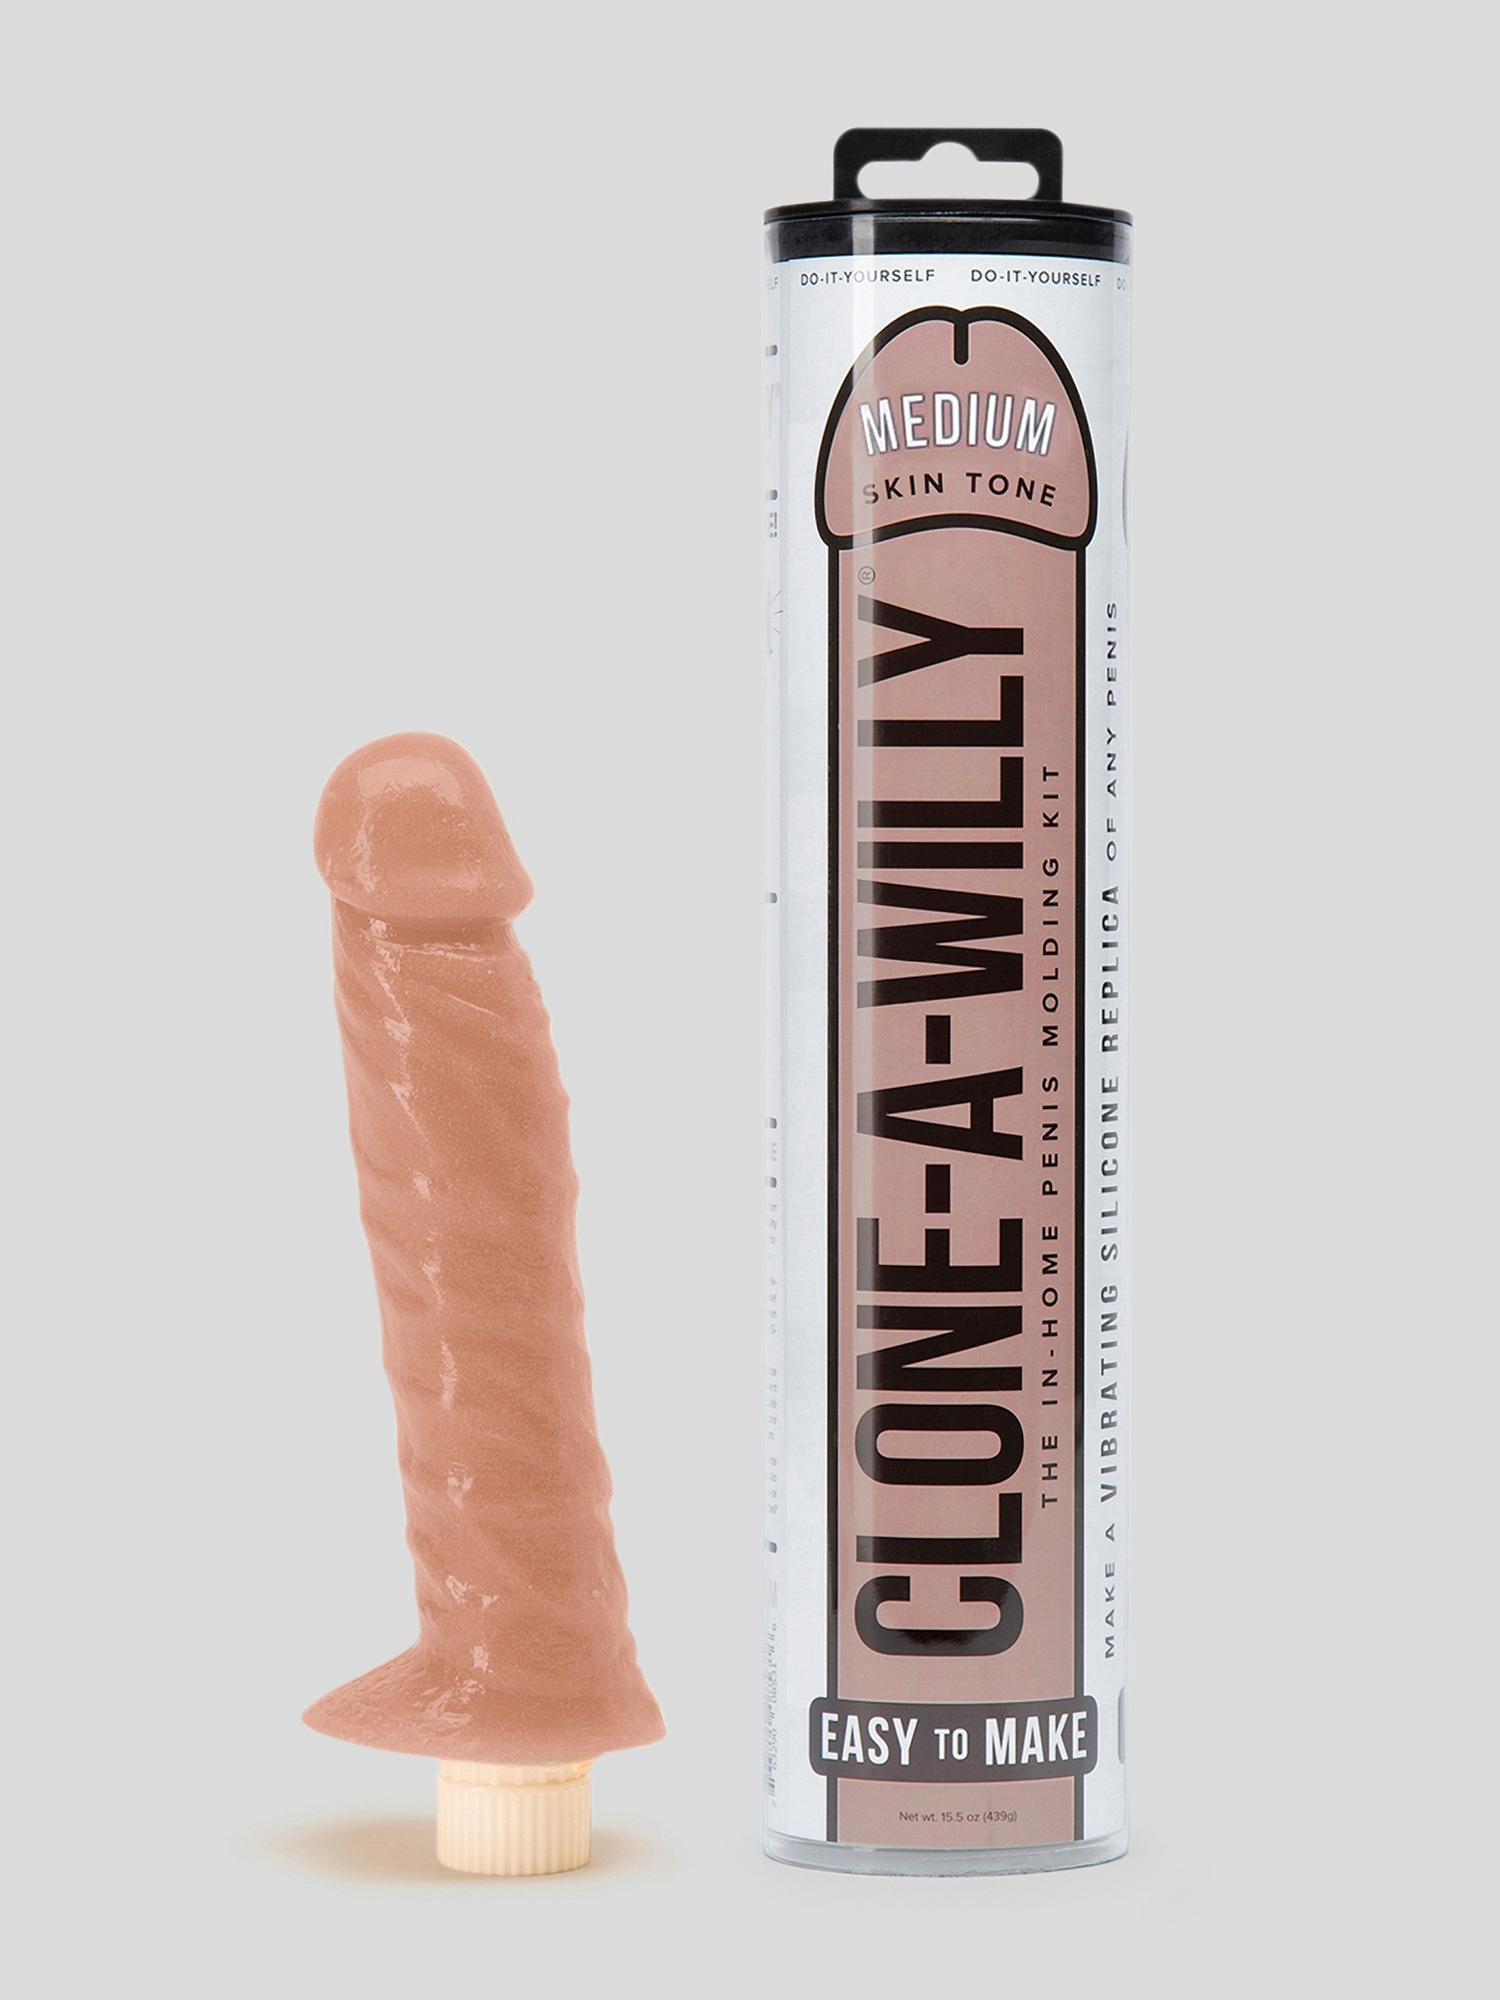 Clone-A-Willy Vibrator Molding Kit. Slide 1